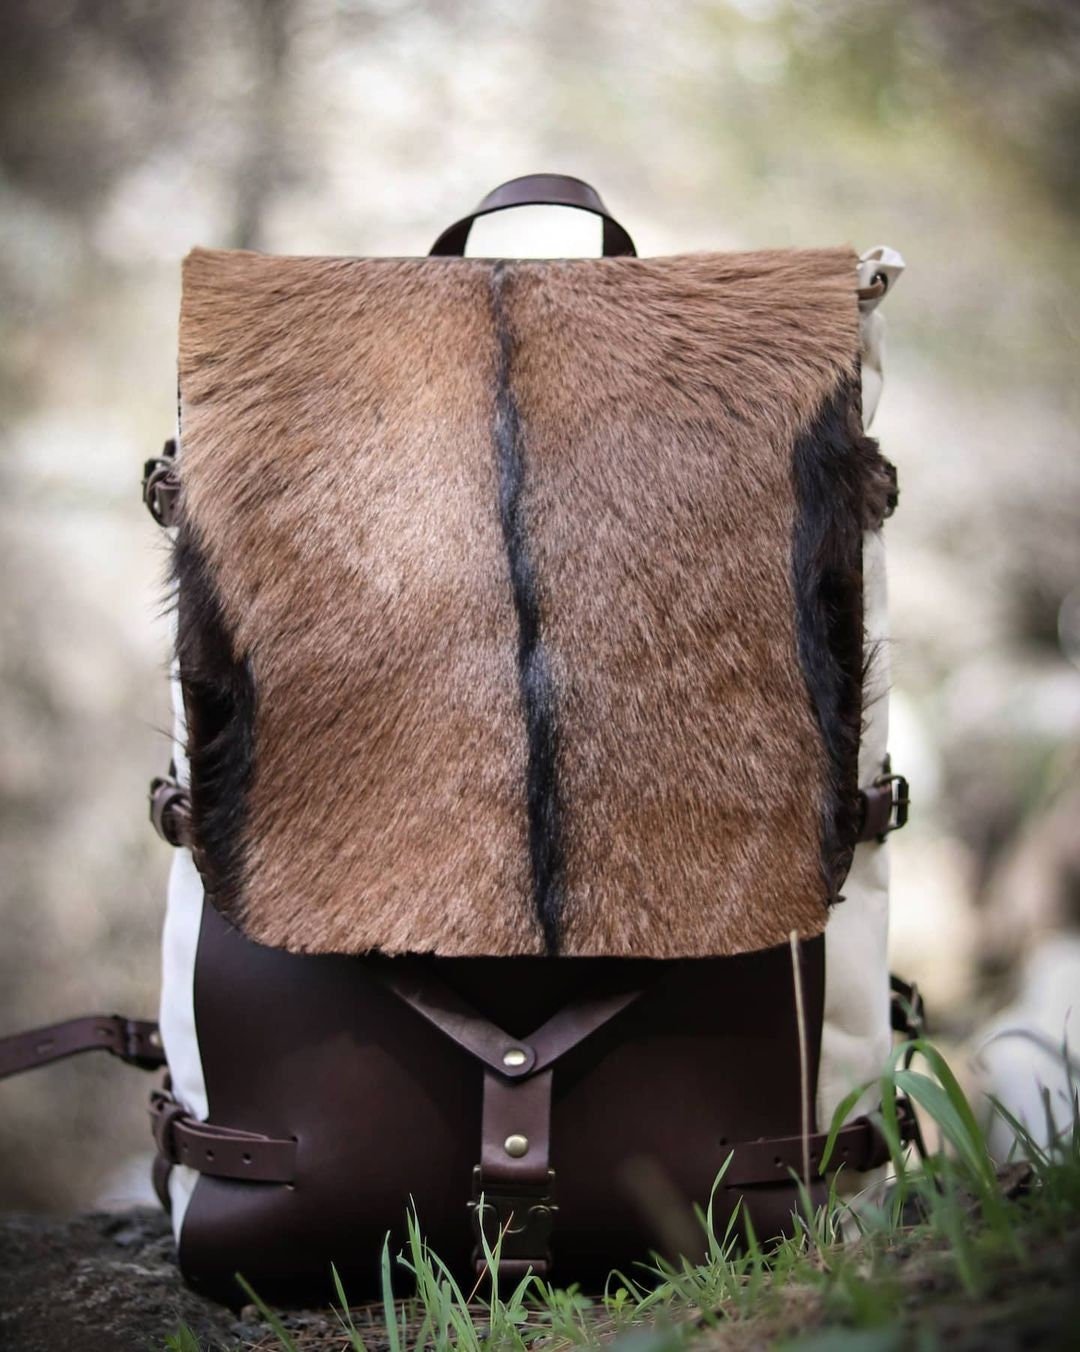 Handmade Leather Backpack | Leather Rucksack | Goat Fur | Waxed Canvas Waterproof Bag for Travel, Daypack, Hiking | 30,40,50 Litres options bushcraft - camping - hiking backpack 99percenthandmade   